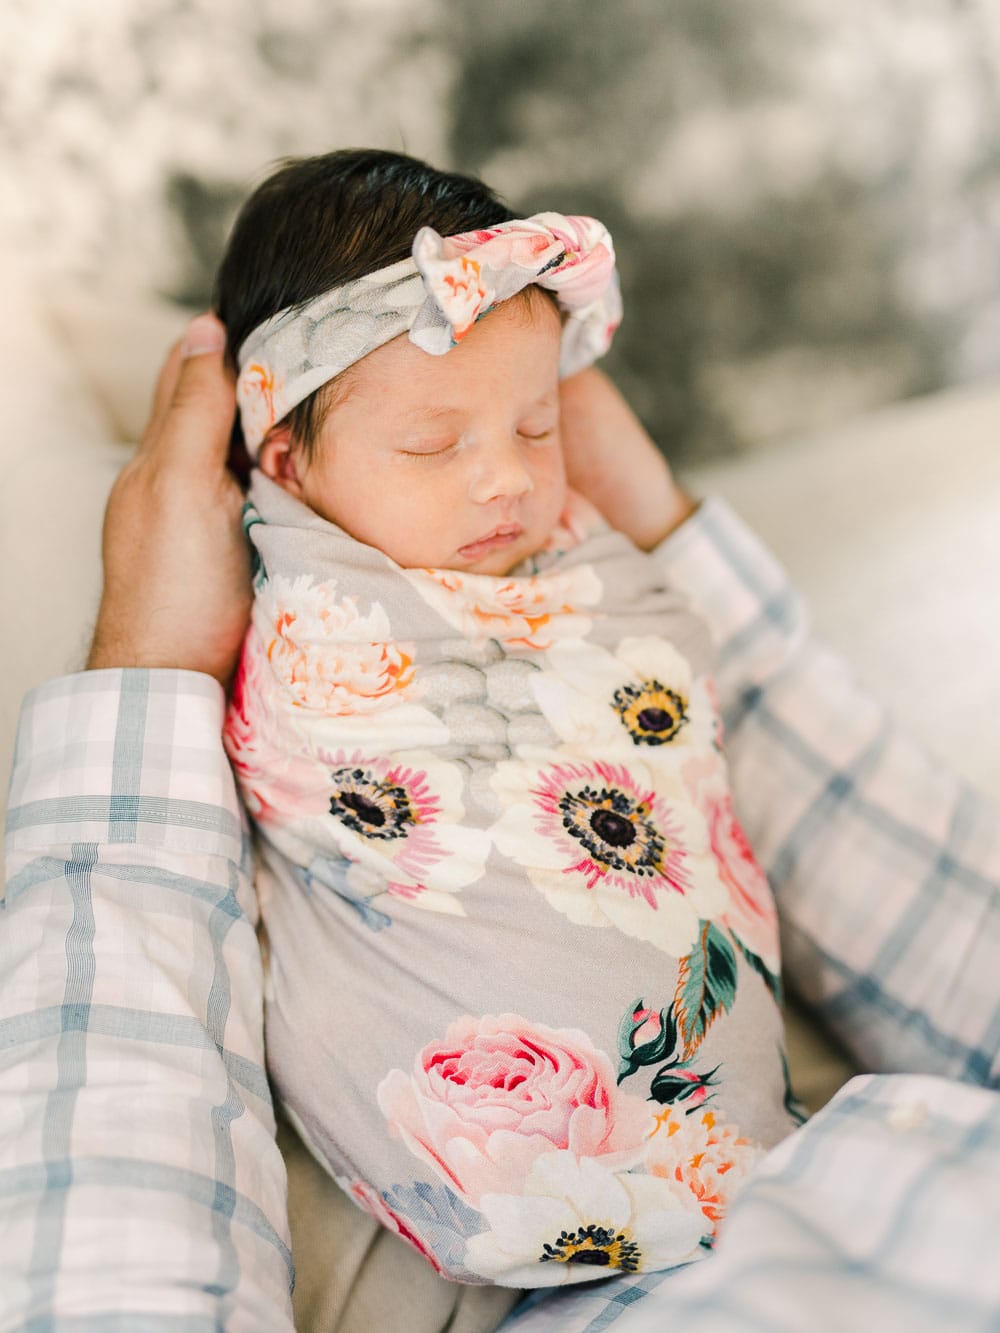 Newborn with dad photo inspiration, Cleveland Newborn Photography, In-home newborn session by Juliana Kaderbek Photography